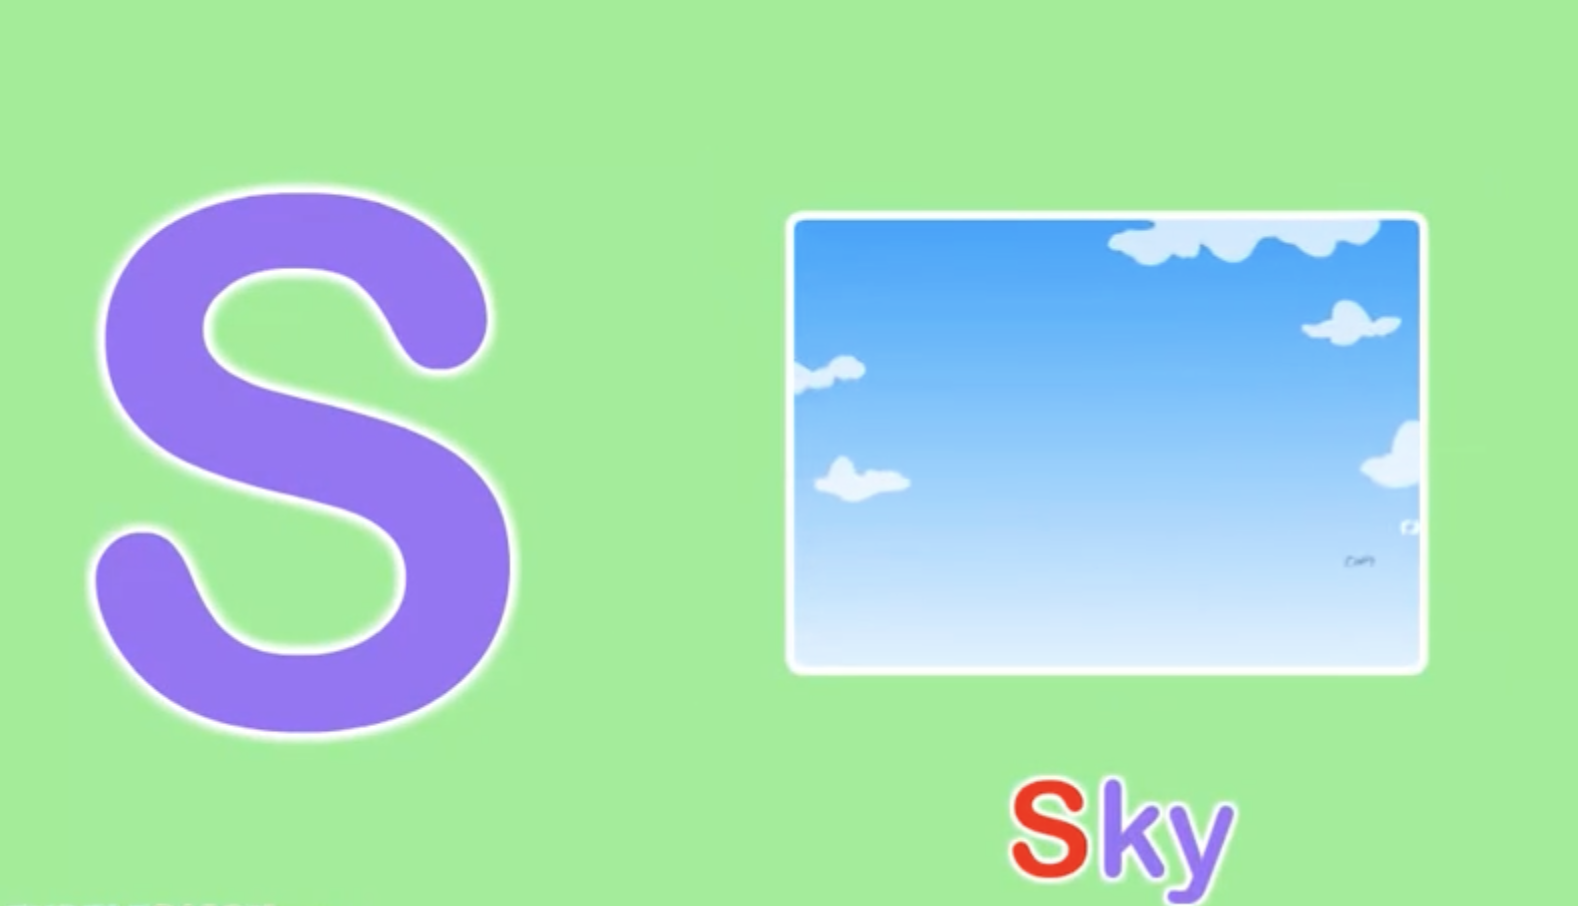 S is for sky